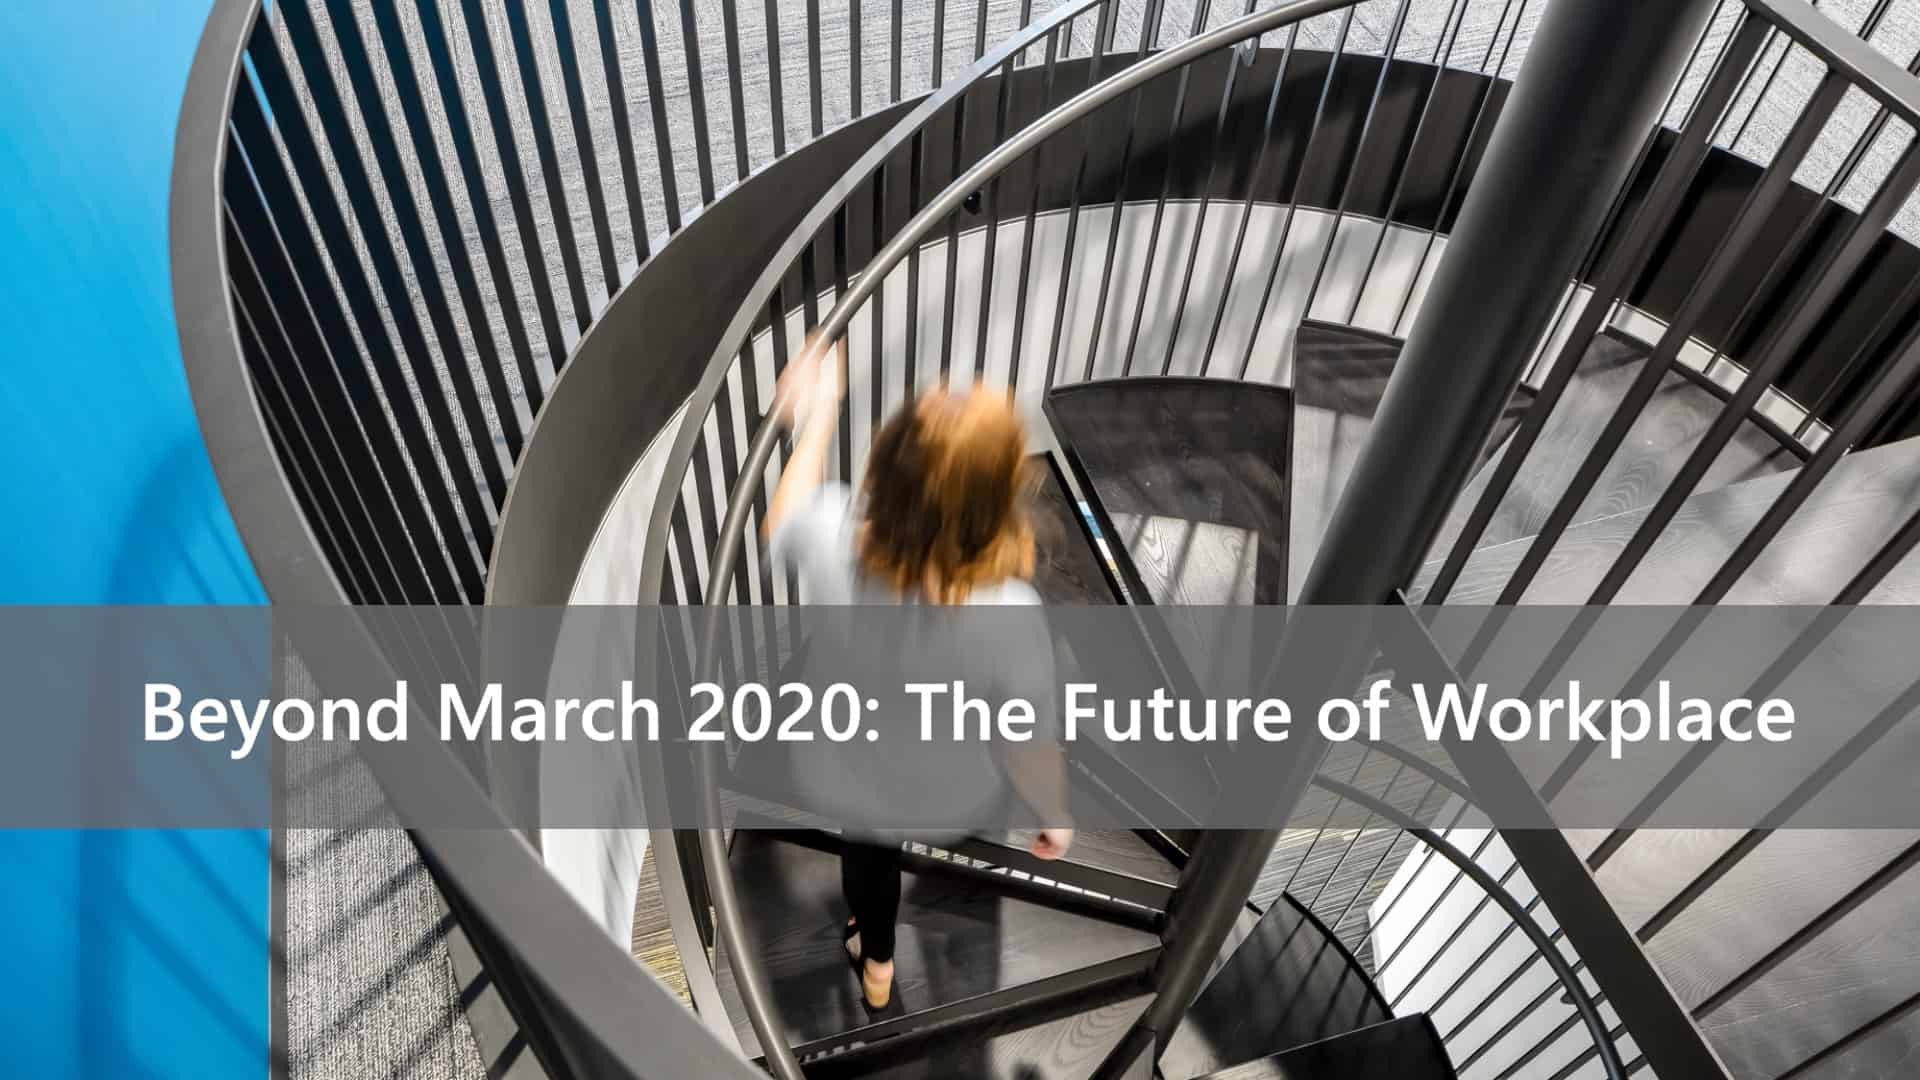 Beyond March 2020: A Workplace Reshaped by COVID-19